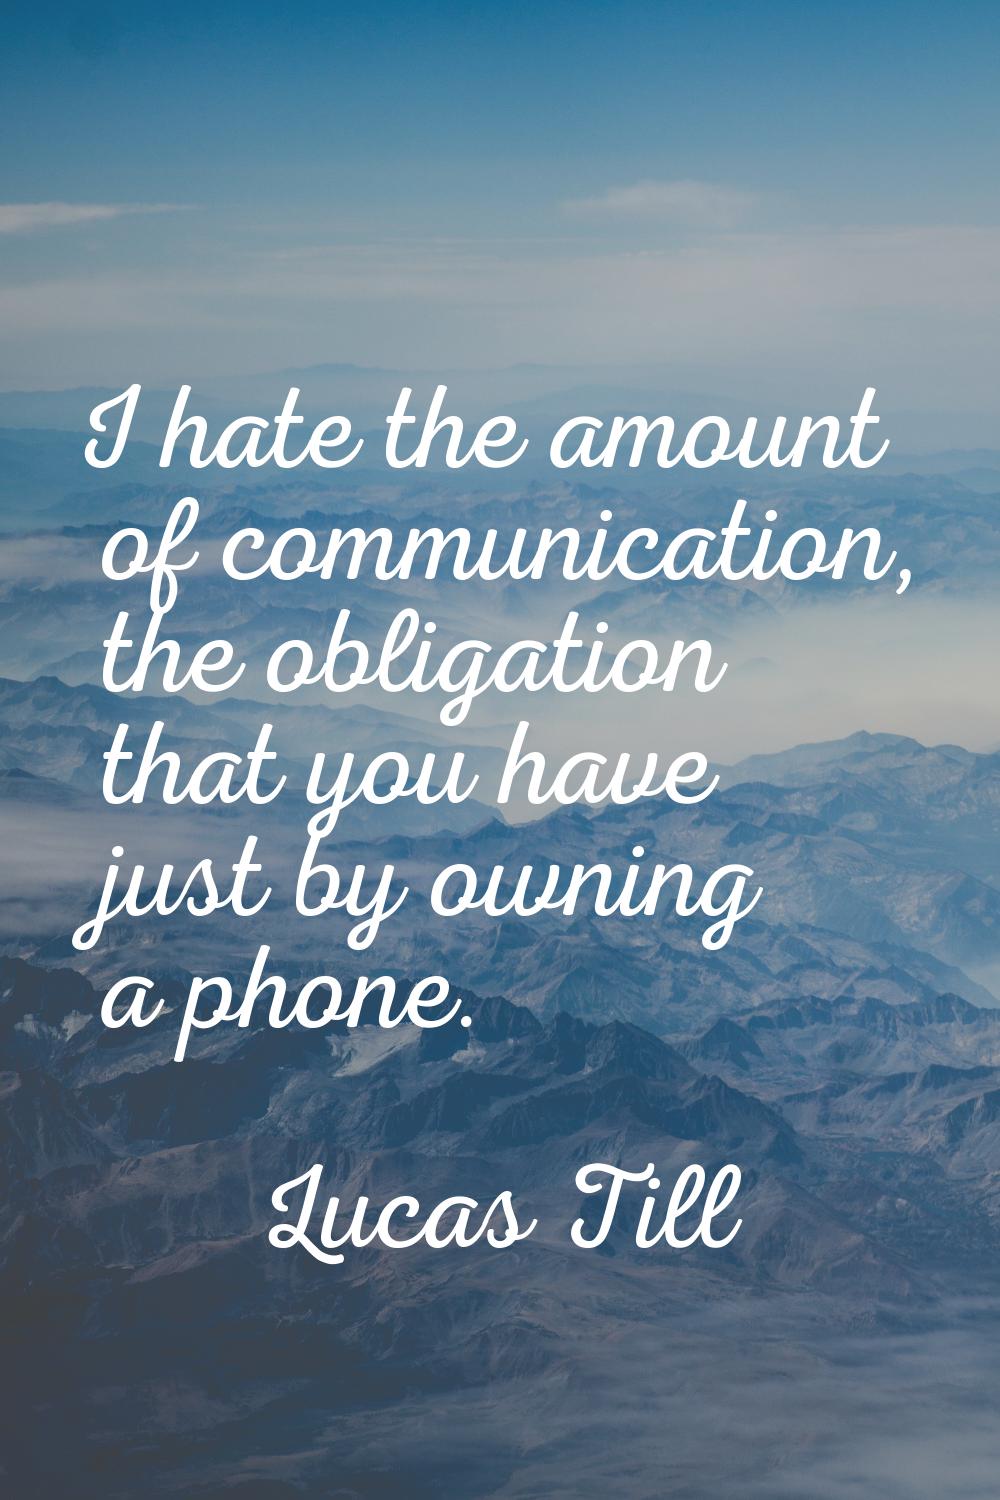 I hate the amount of communication, the obligation that you have just by owning a phone.